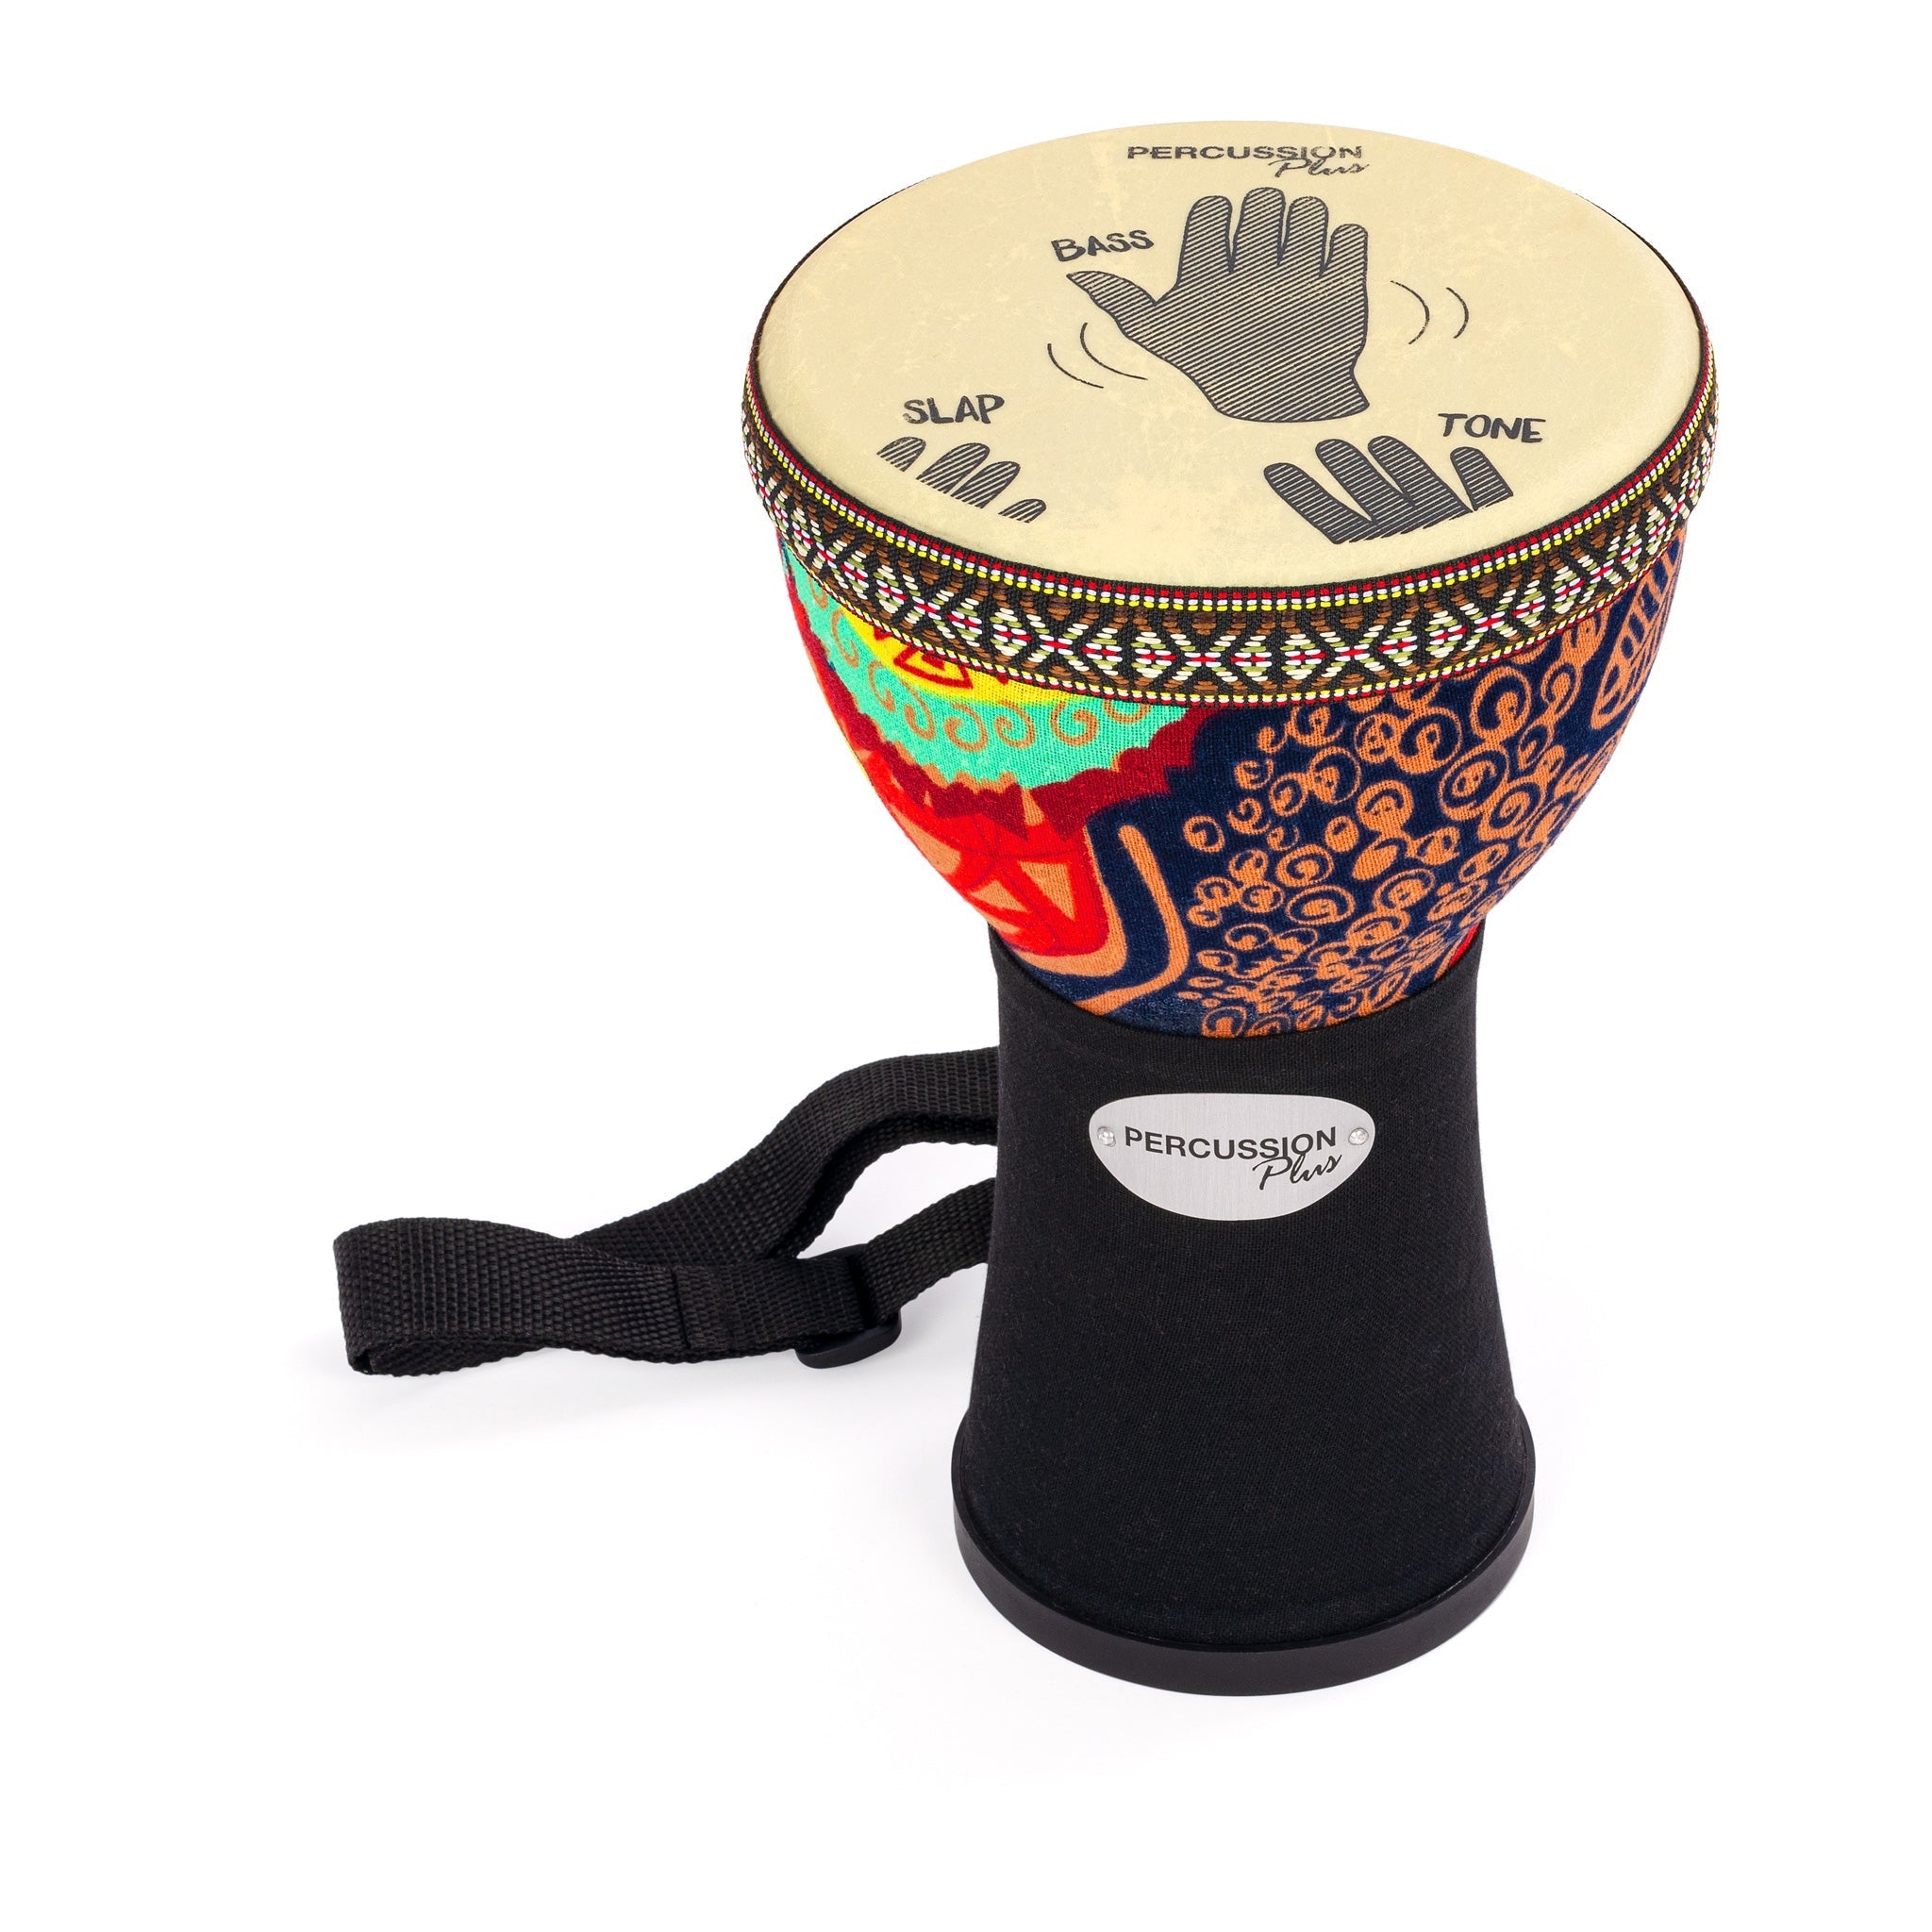 The Djembe - Details About The Djembe